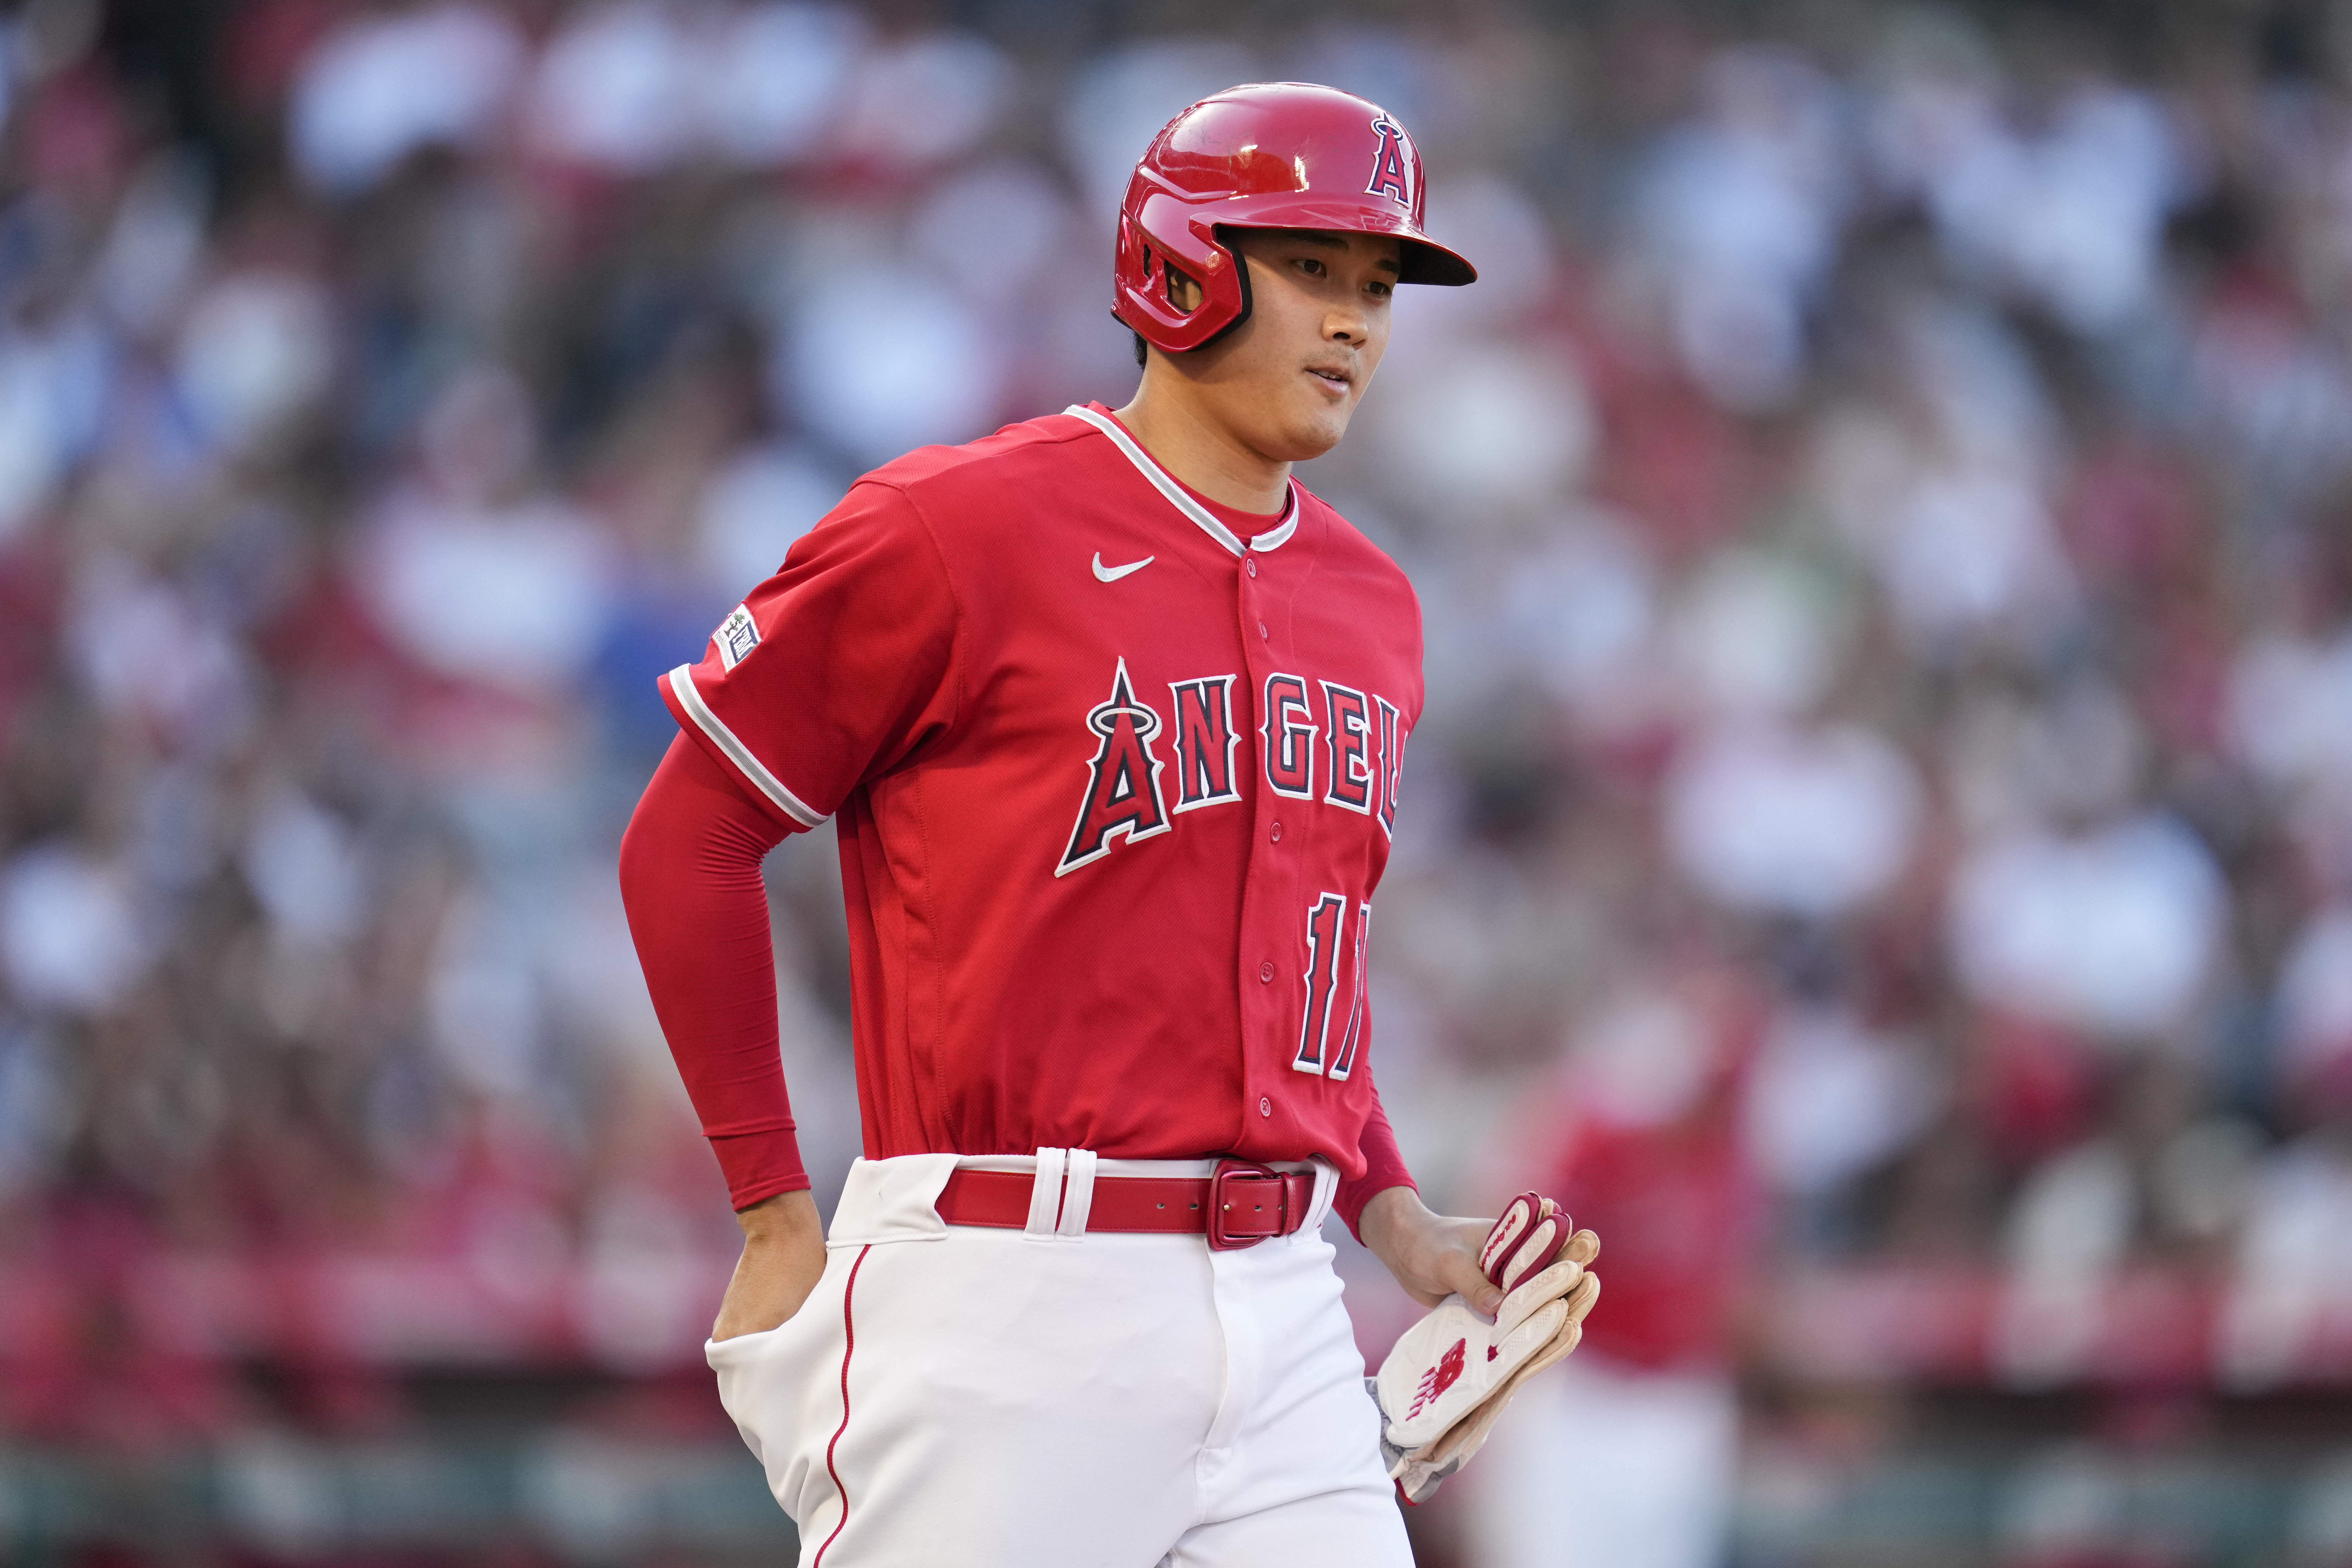 Los Angeles Angels' should trade Shohei Ohtani with Mike Trout